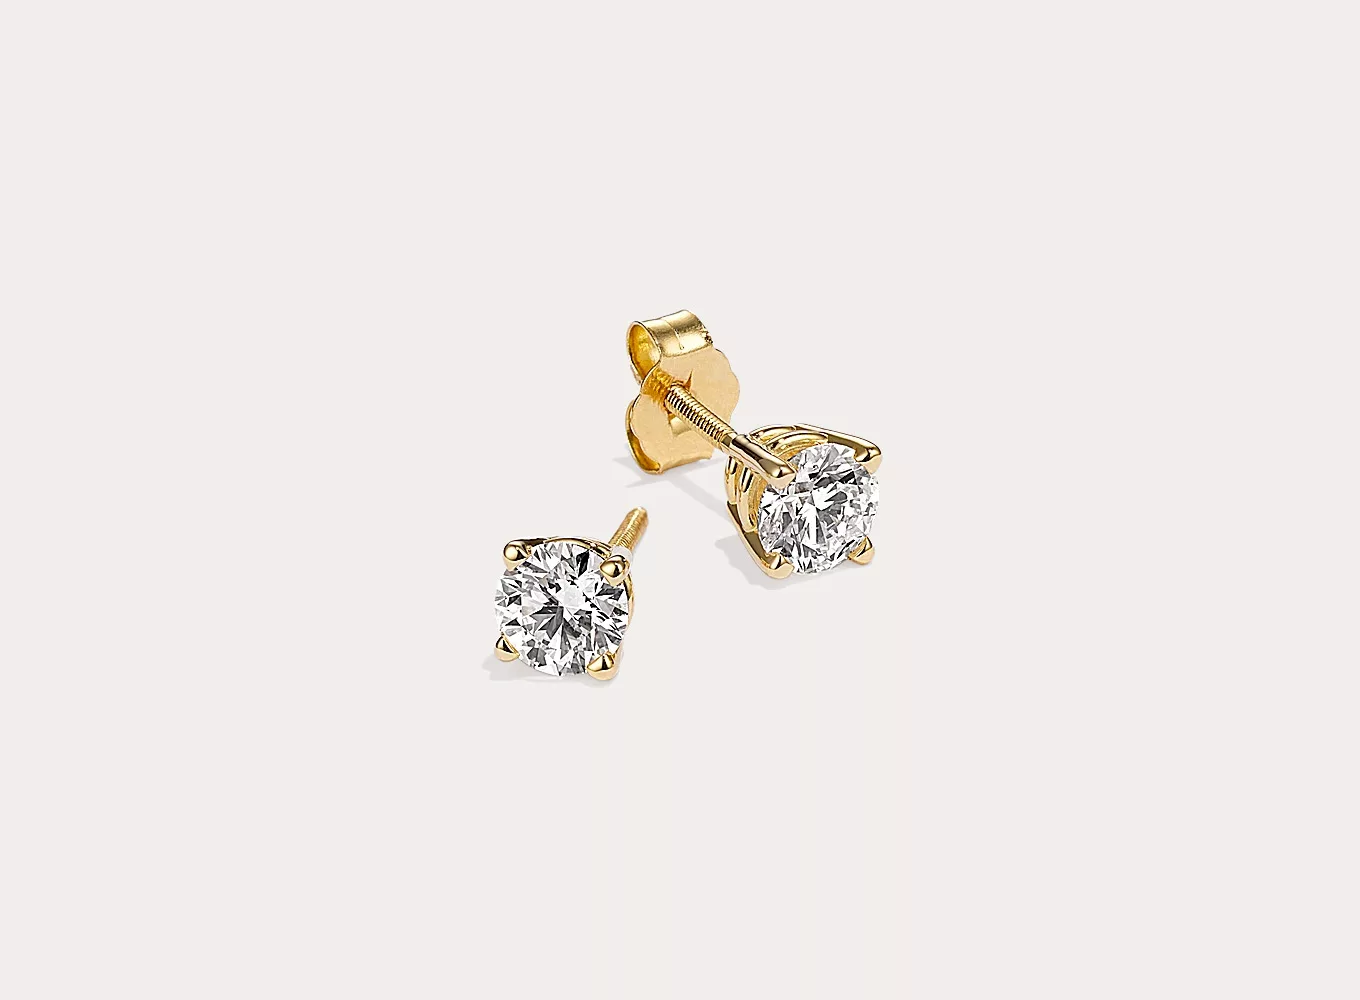 7/8 ct. Lab-Grown Diamond Stud Earrings in 14k Yellow Gold. These earrings are set in quality 14-karat yellow gold baskets, which has added nickel, zinc, silver, and copper alloys that make a bright shade. The lab-grown diamonds have been hand-matched for exceptional sparkle and fire. The push-on/screw-off backs securely hold the earrings in place.